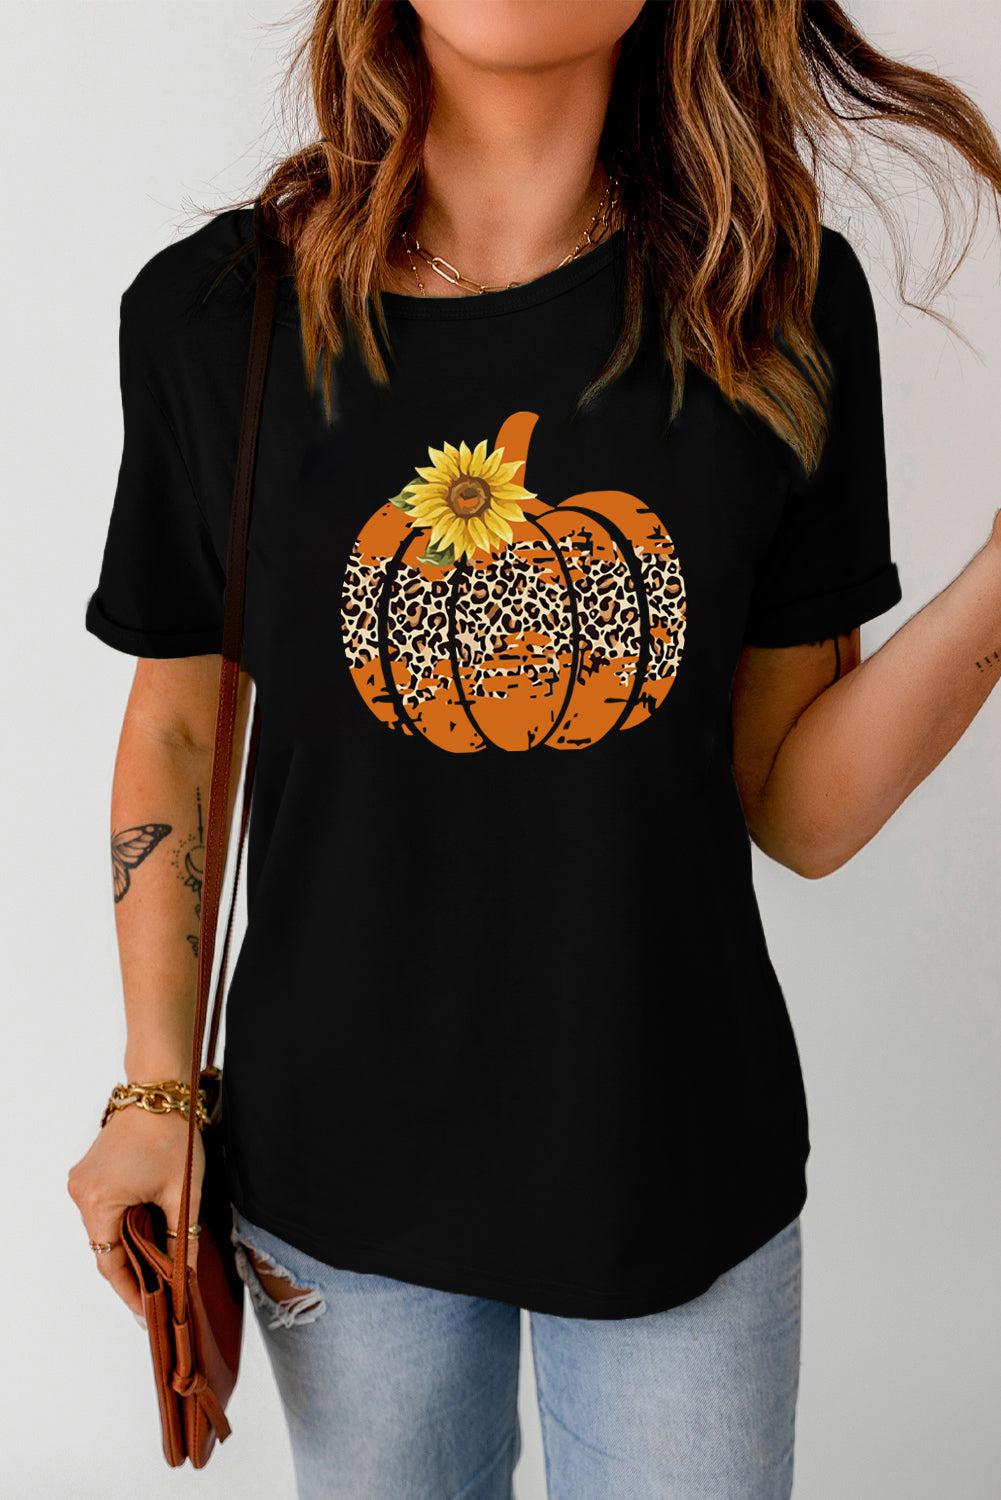 Floral Pumpkin Graphic Tee BLUE ZONE PLANET